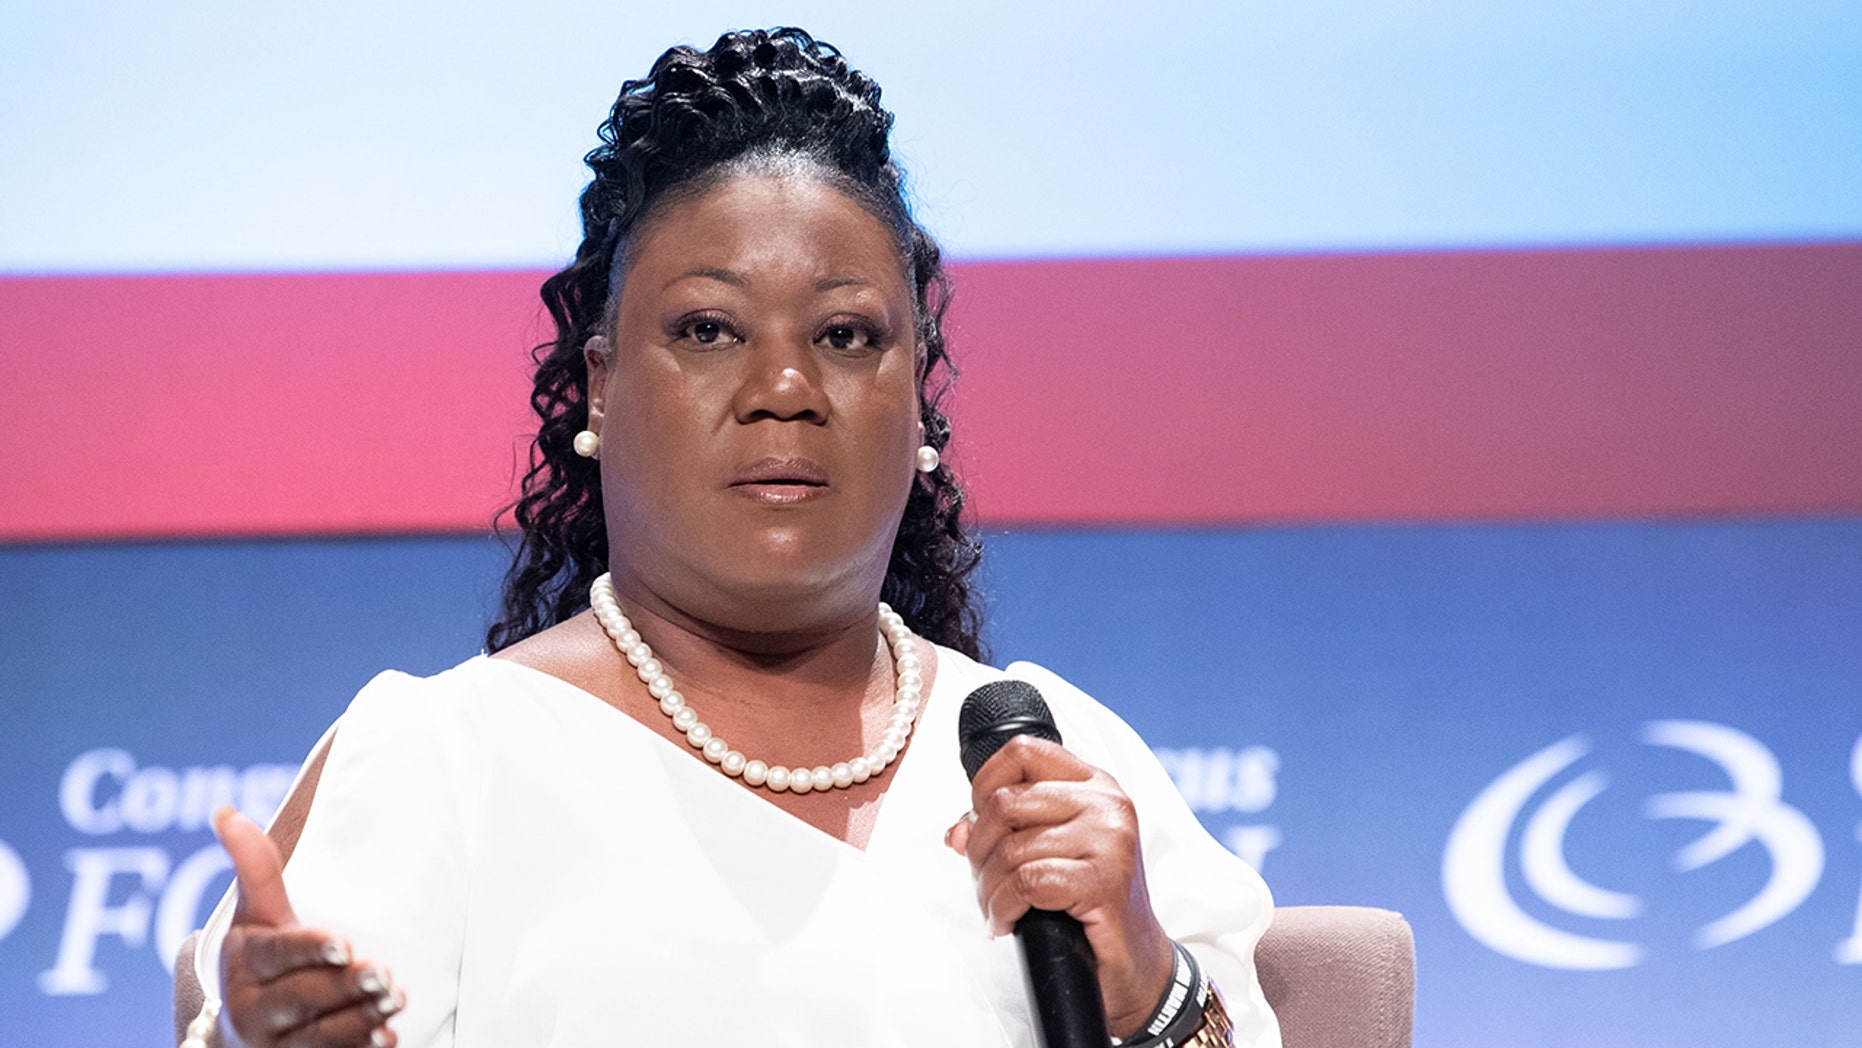 Sybrina Fulton speaks at the National Town Hall on the second day of the 48th Annual Congressional Black Caucus Foundation on September 13, 2018, in Washington, D.C. (Photo by Earl Gibson III/Getty Images)